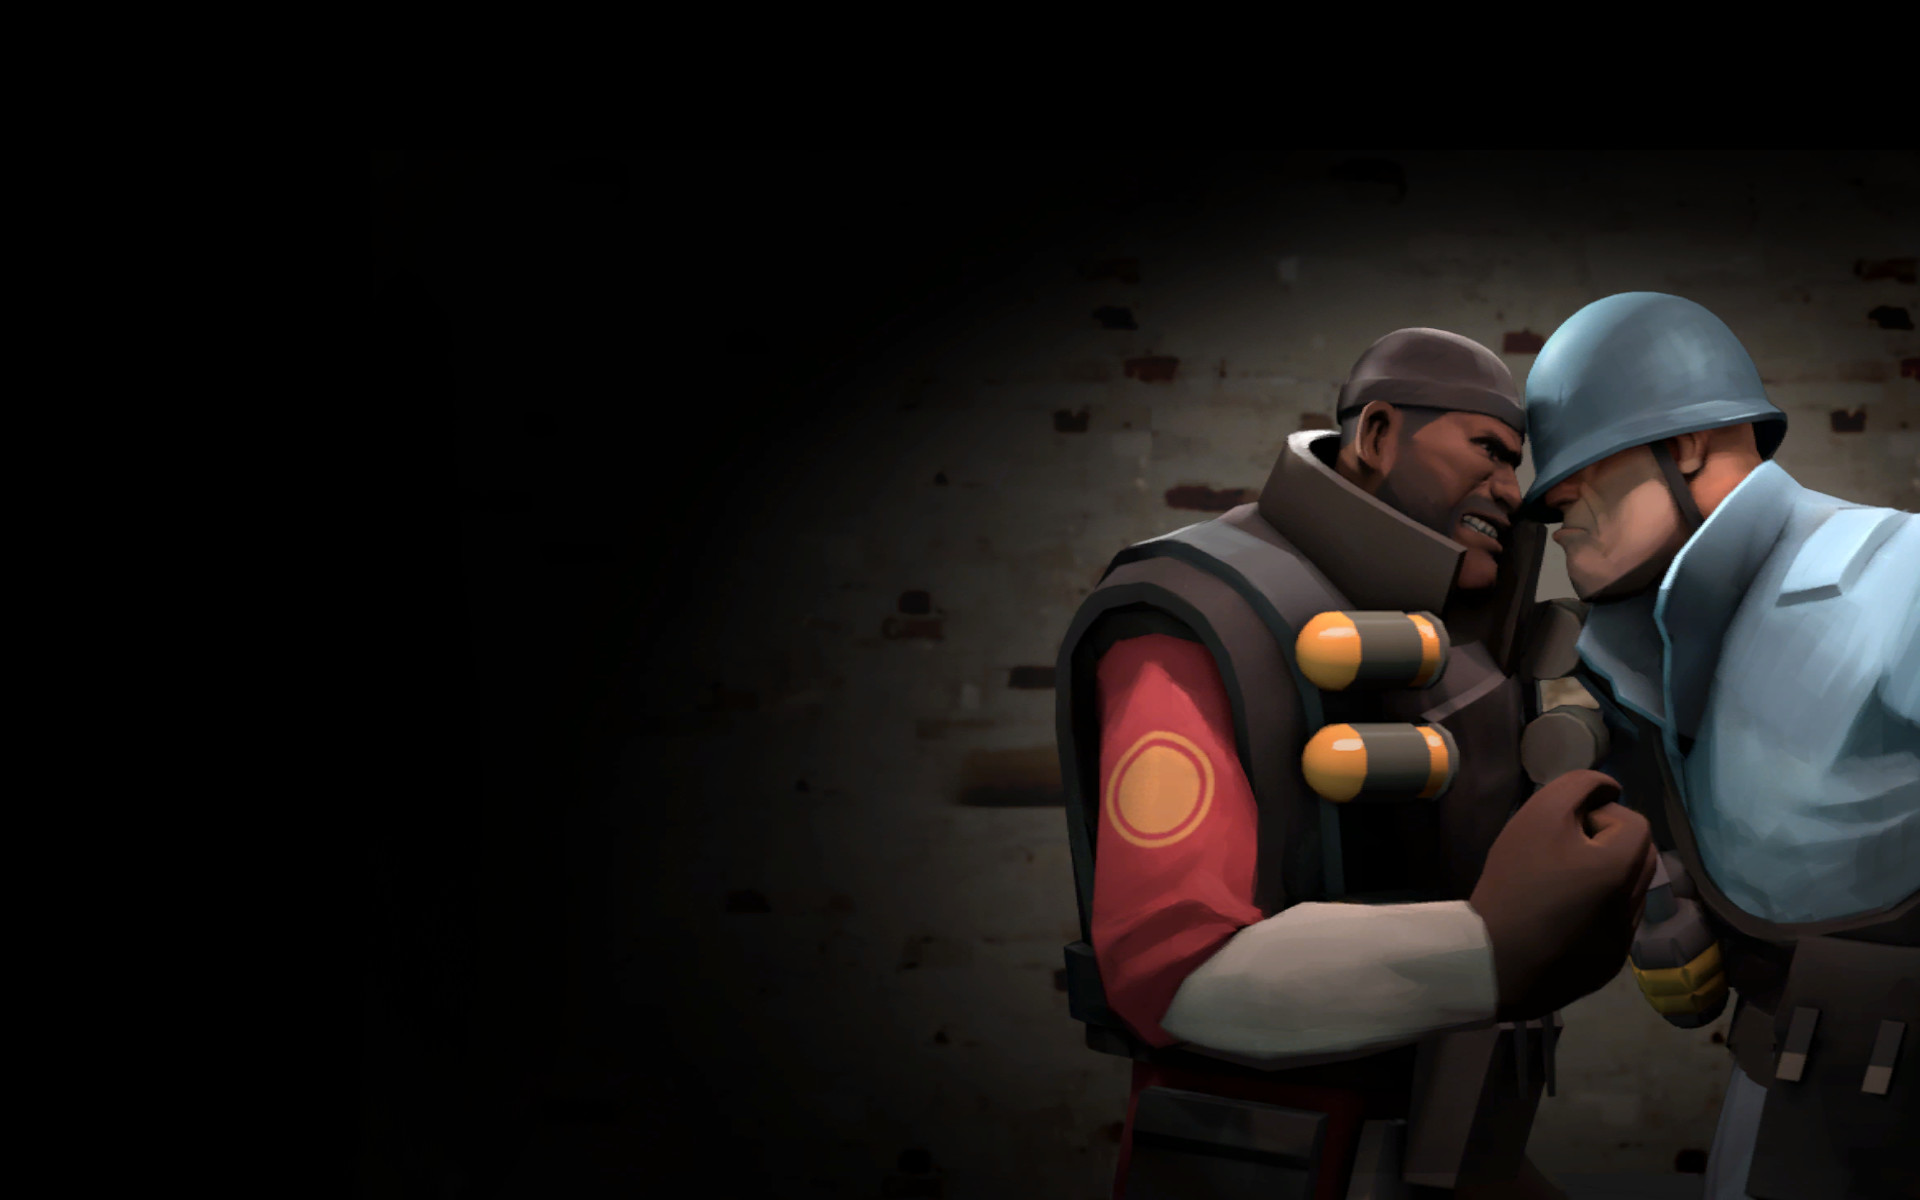 1920x1200 File Name: #903928 TF2 Wallpapers | Games Wallpapers Gallery - PC .